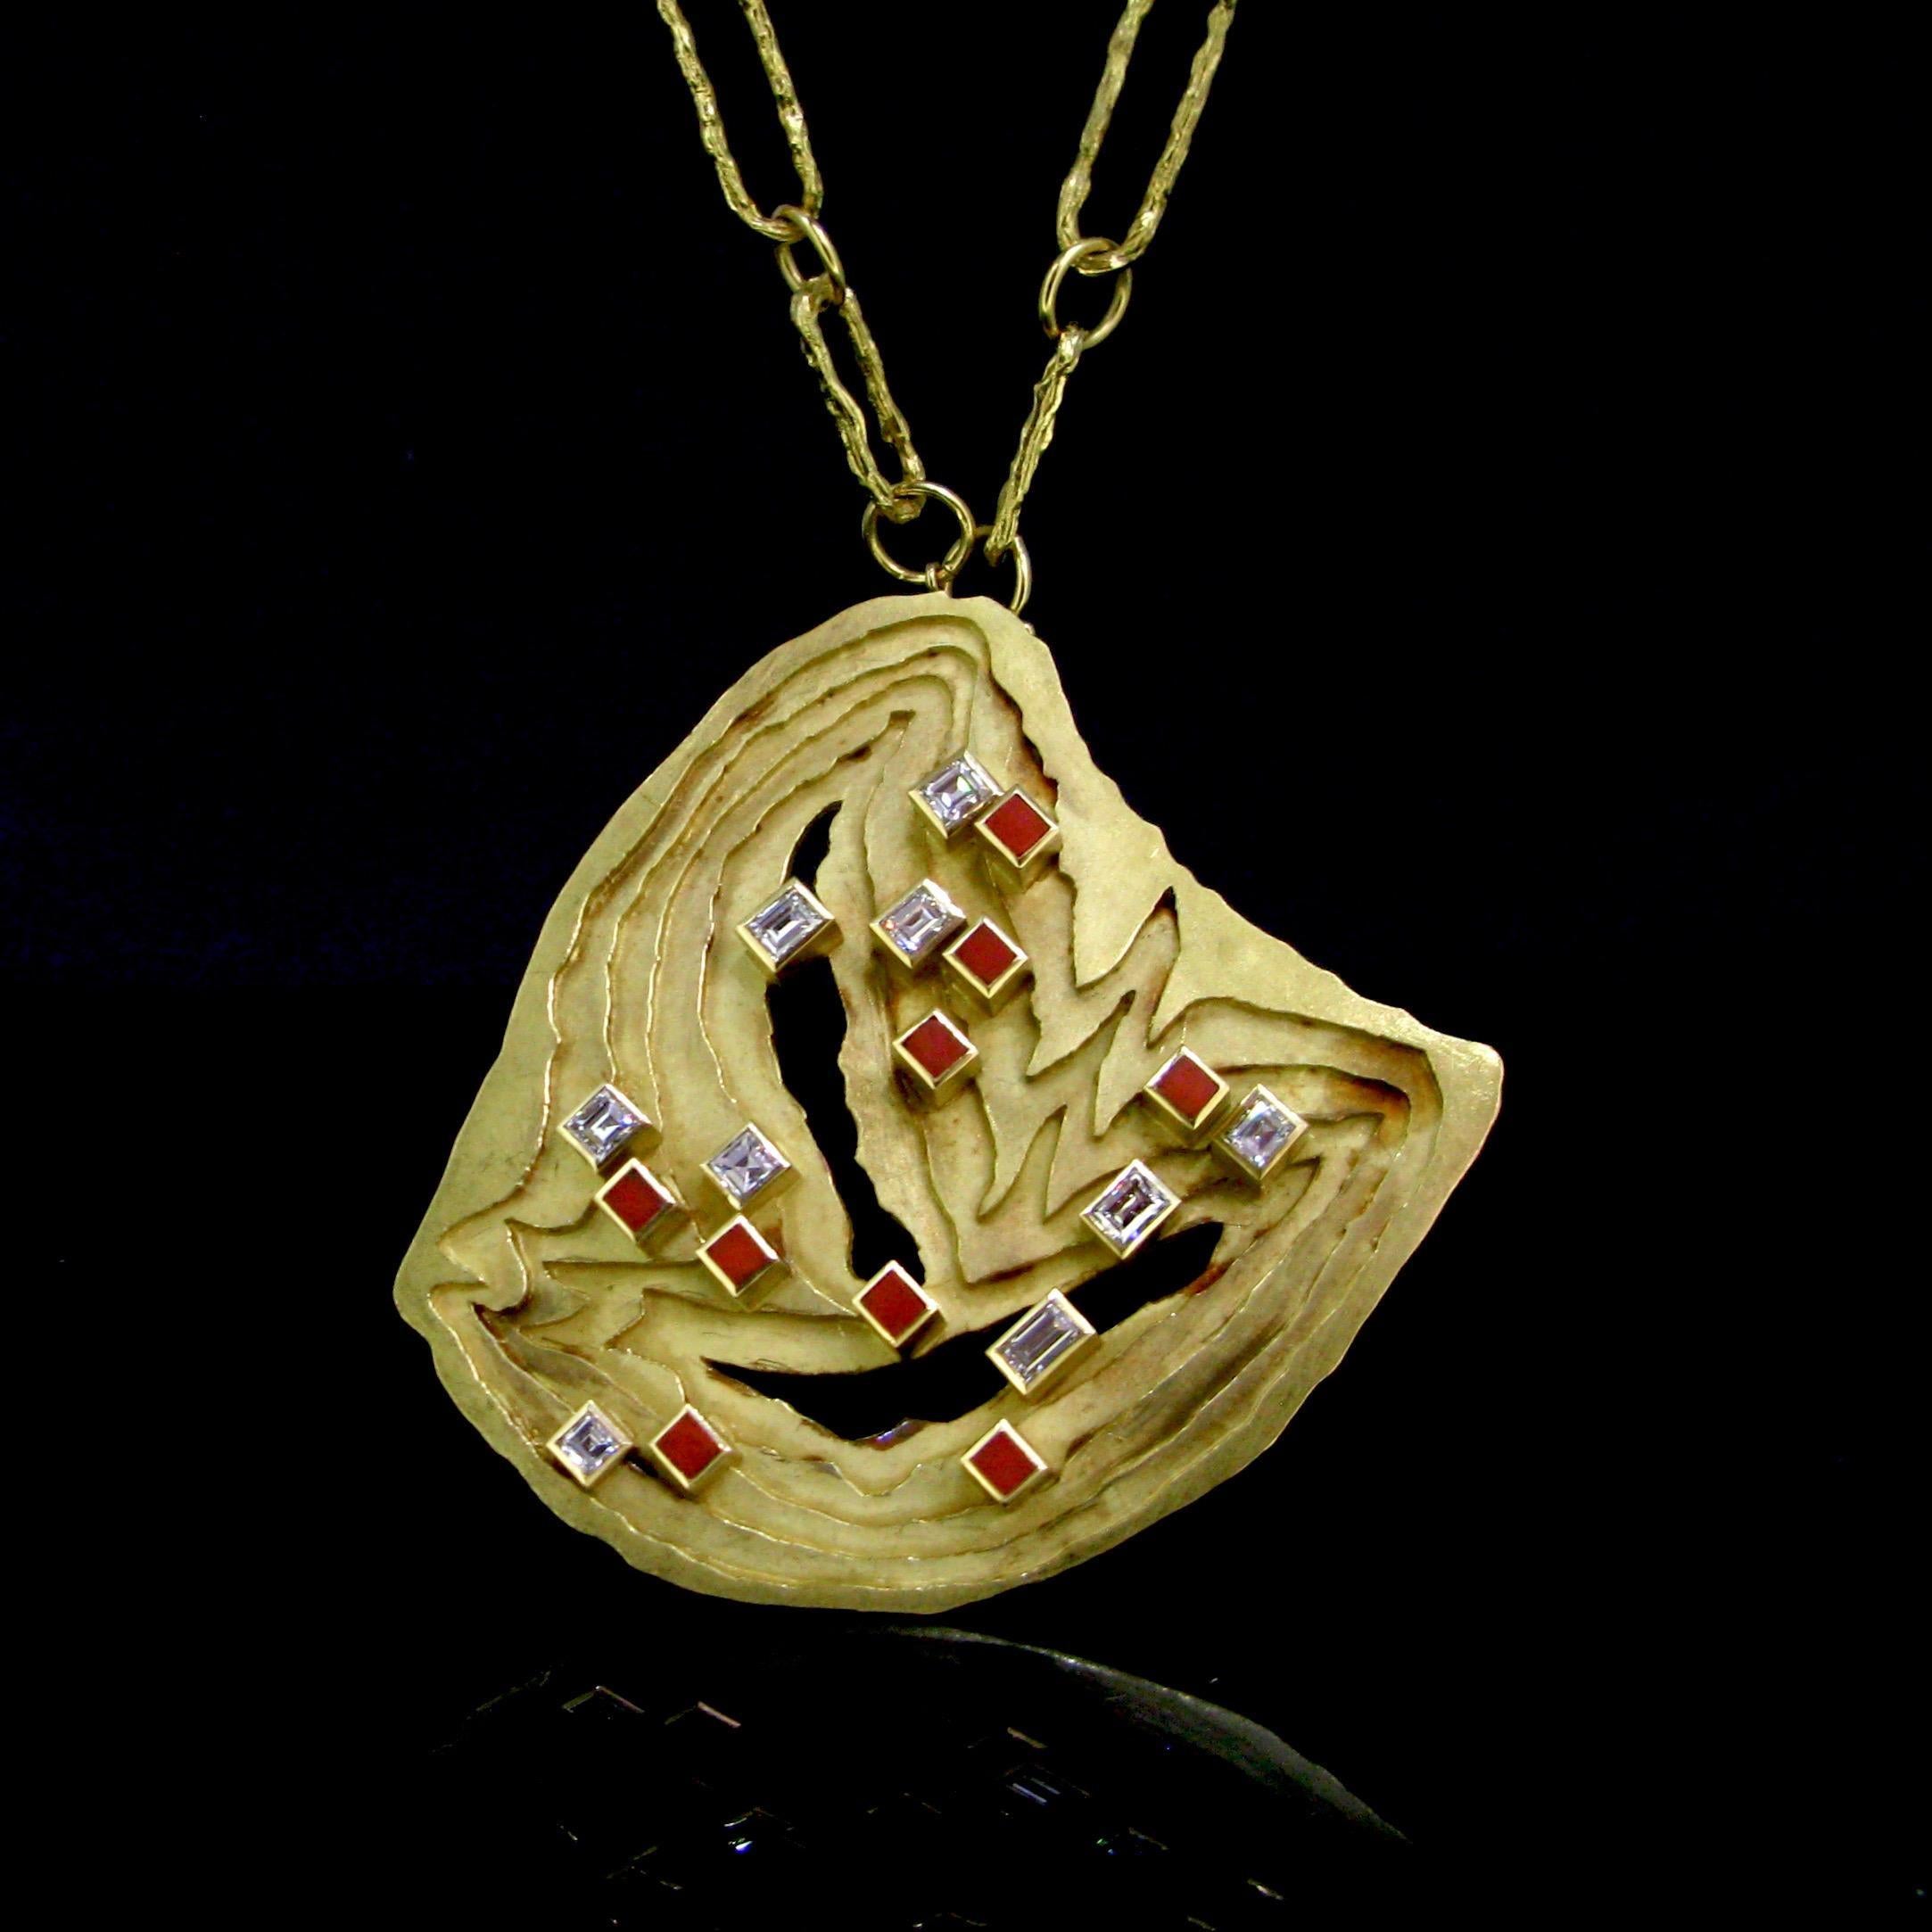 Weight:	56.88gr

Metal:	18kt yellow gold 

Condition:	Very Good

Stones:		9 Diamonds
•	Cut:	Baguette
•	Total carat weight:	3.50ct approximately
•	Colour:	G/H	
•	Clarity:	VS

Others:	9 Plaques of Coral	

Hallmarks:	French, the eagle’s head
		Maker’s